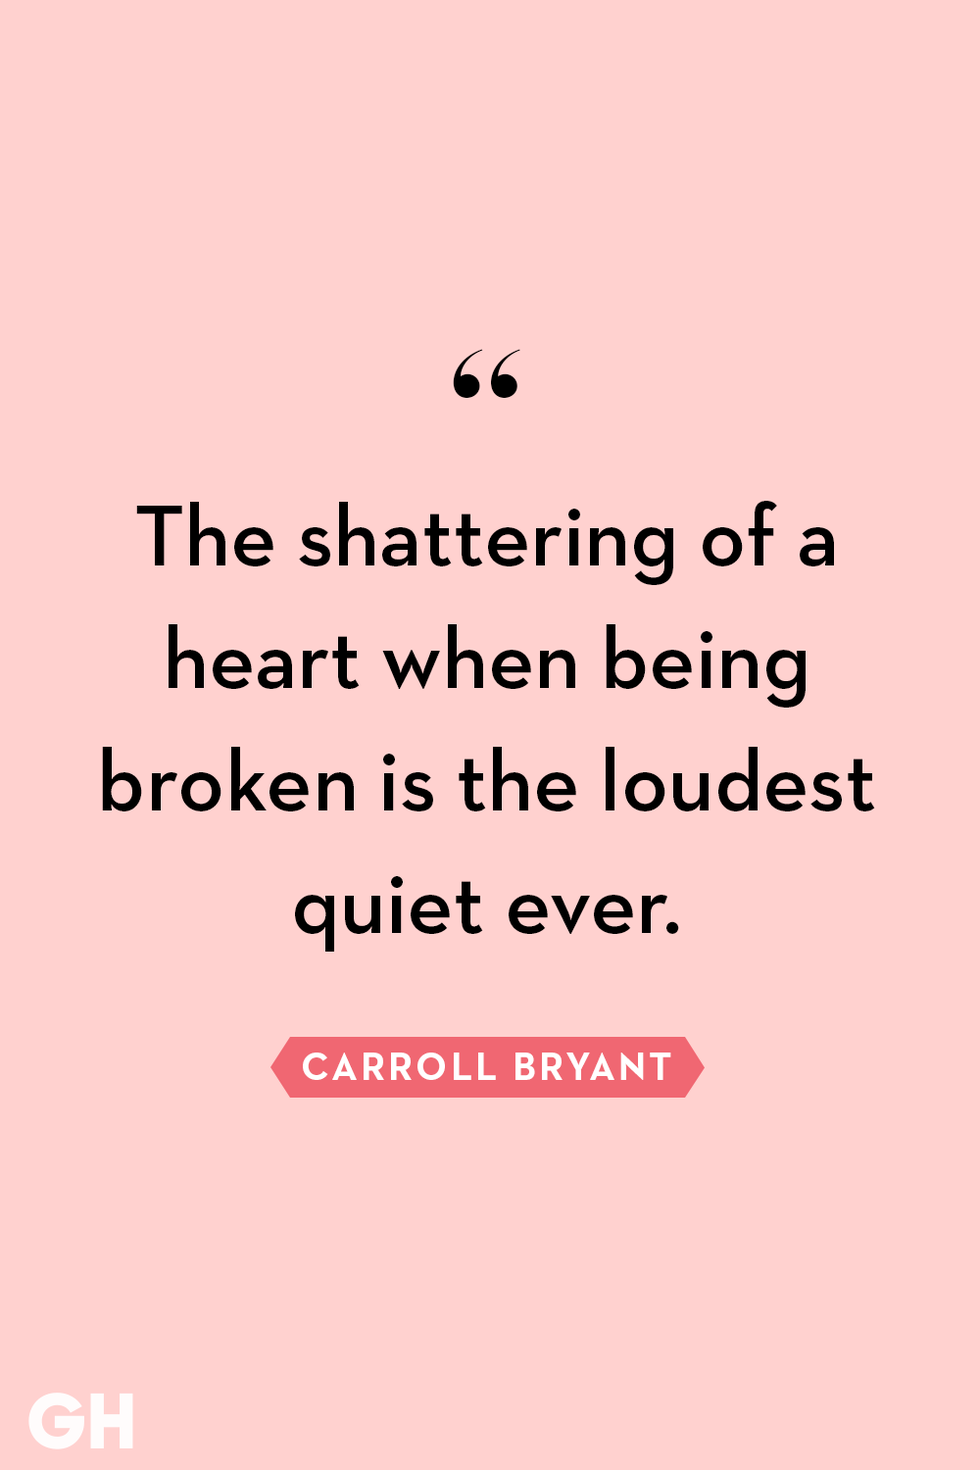 100 Broken Heart Quotes to Help You Deal With the Pain